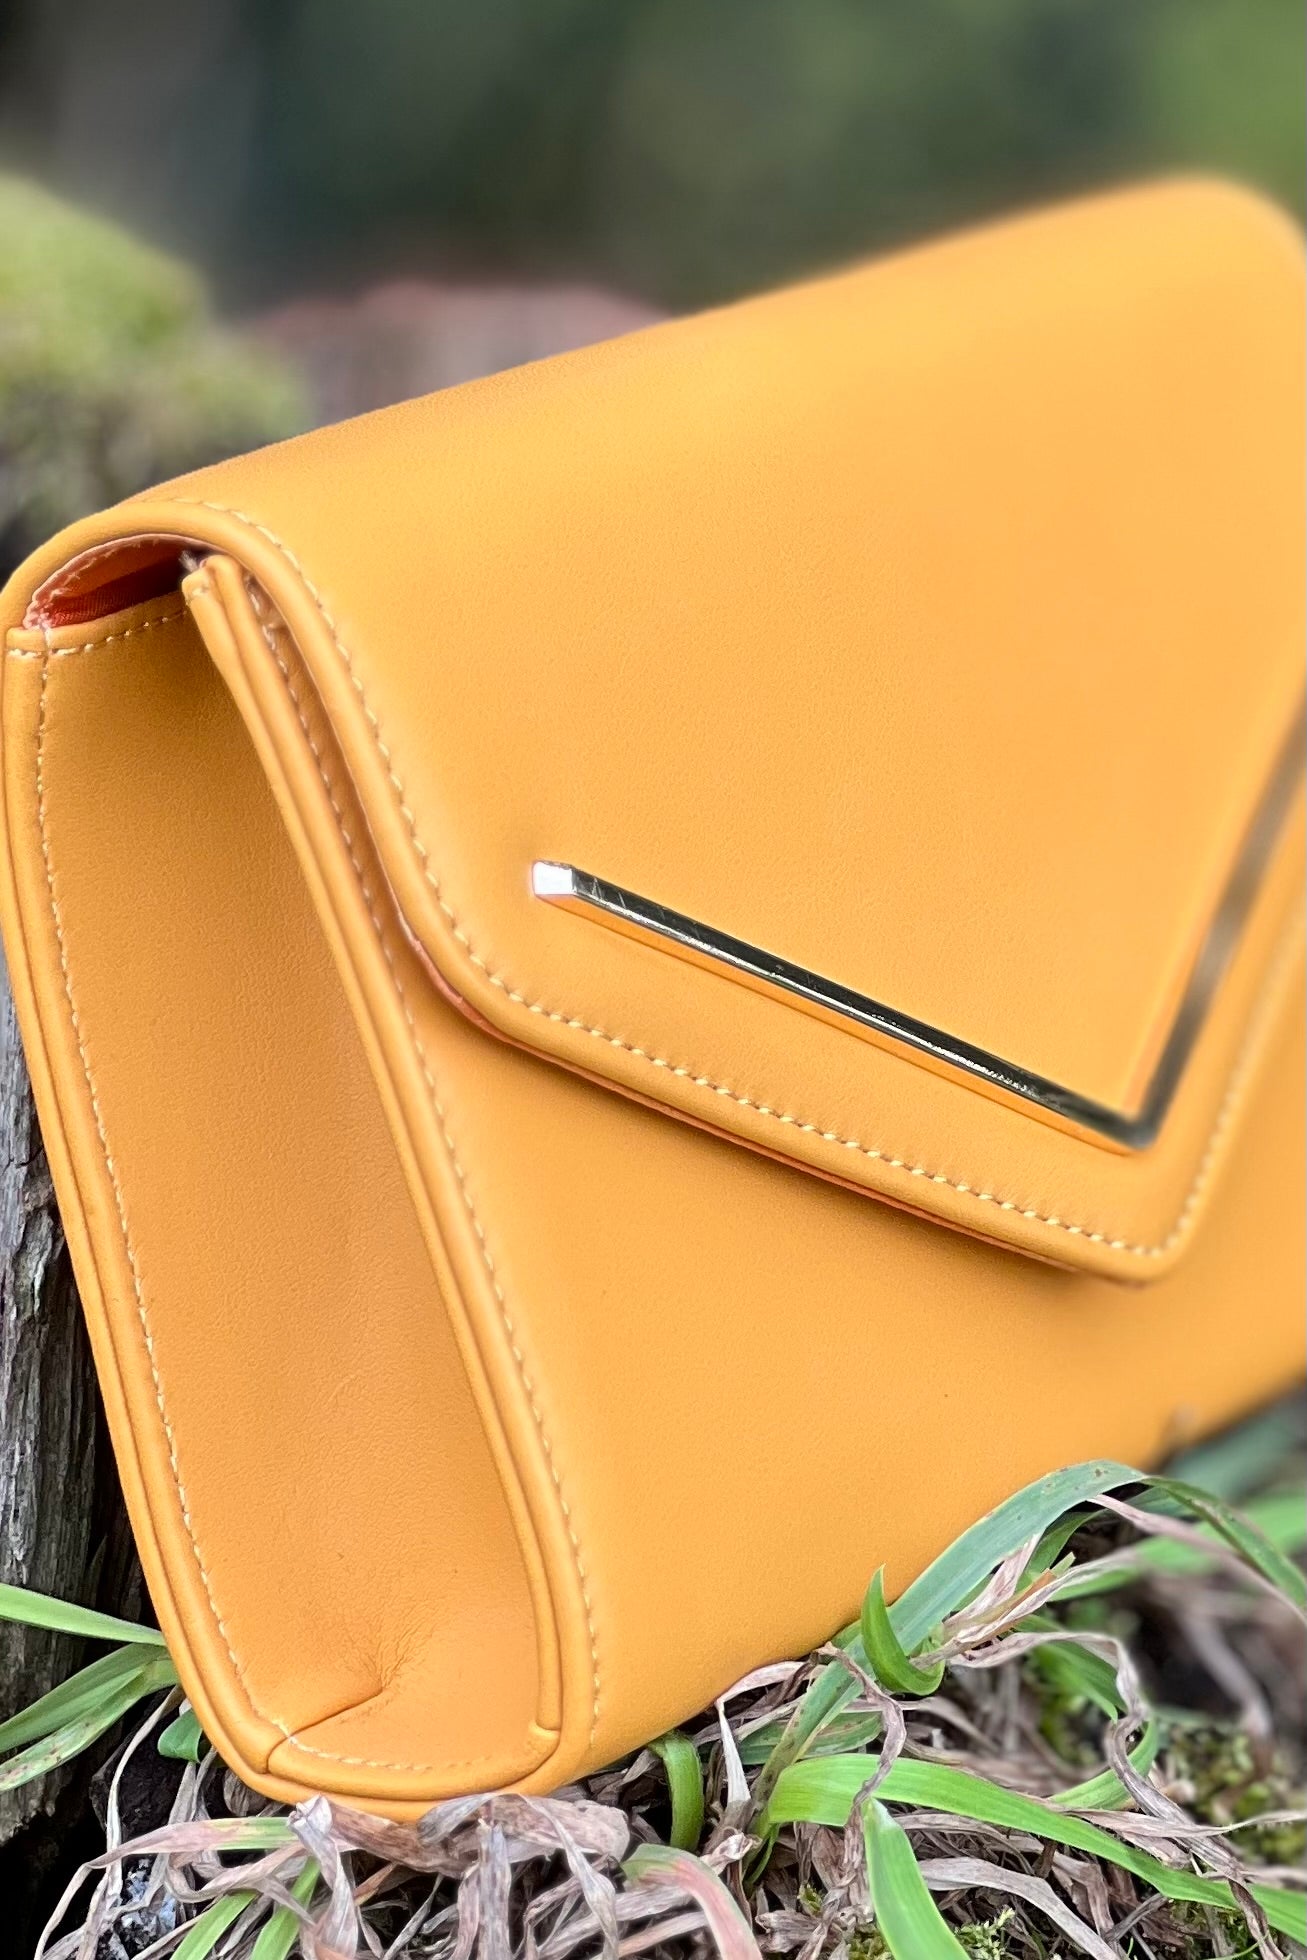 You’ve Got Mail Clutch - Yellow